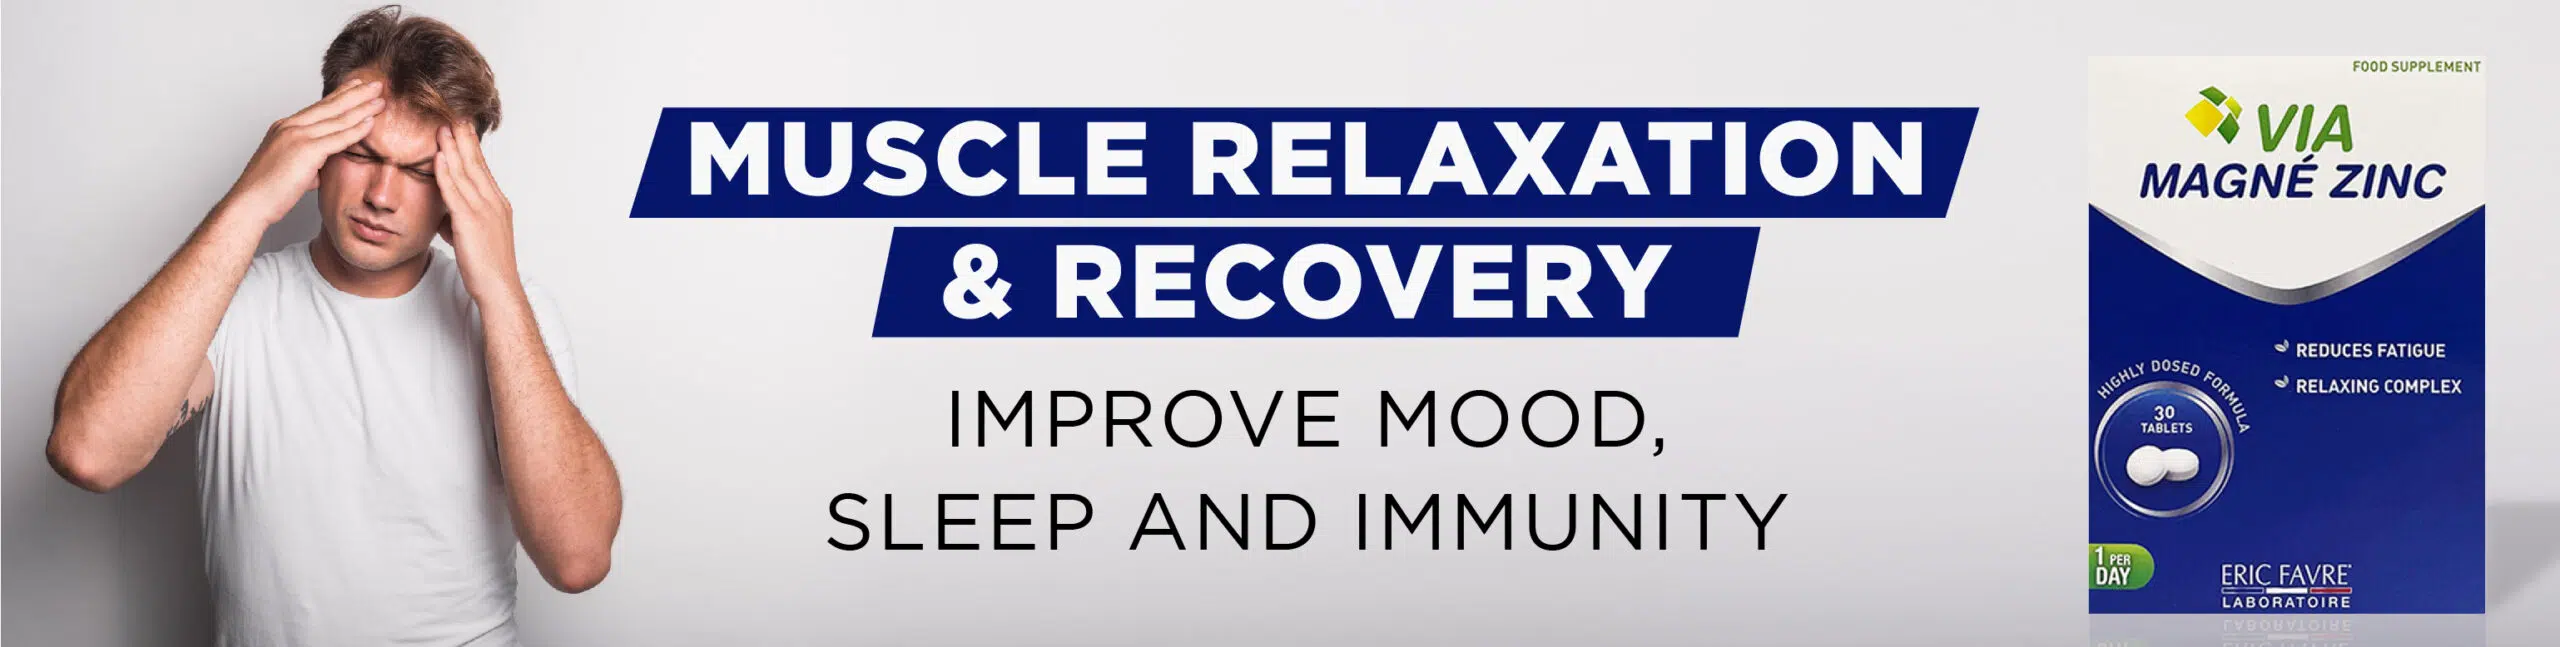 Muscle relaxation and recovery via magne zinc